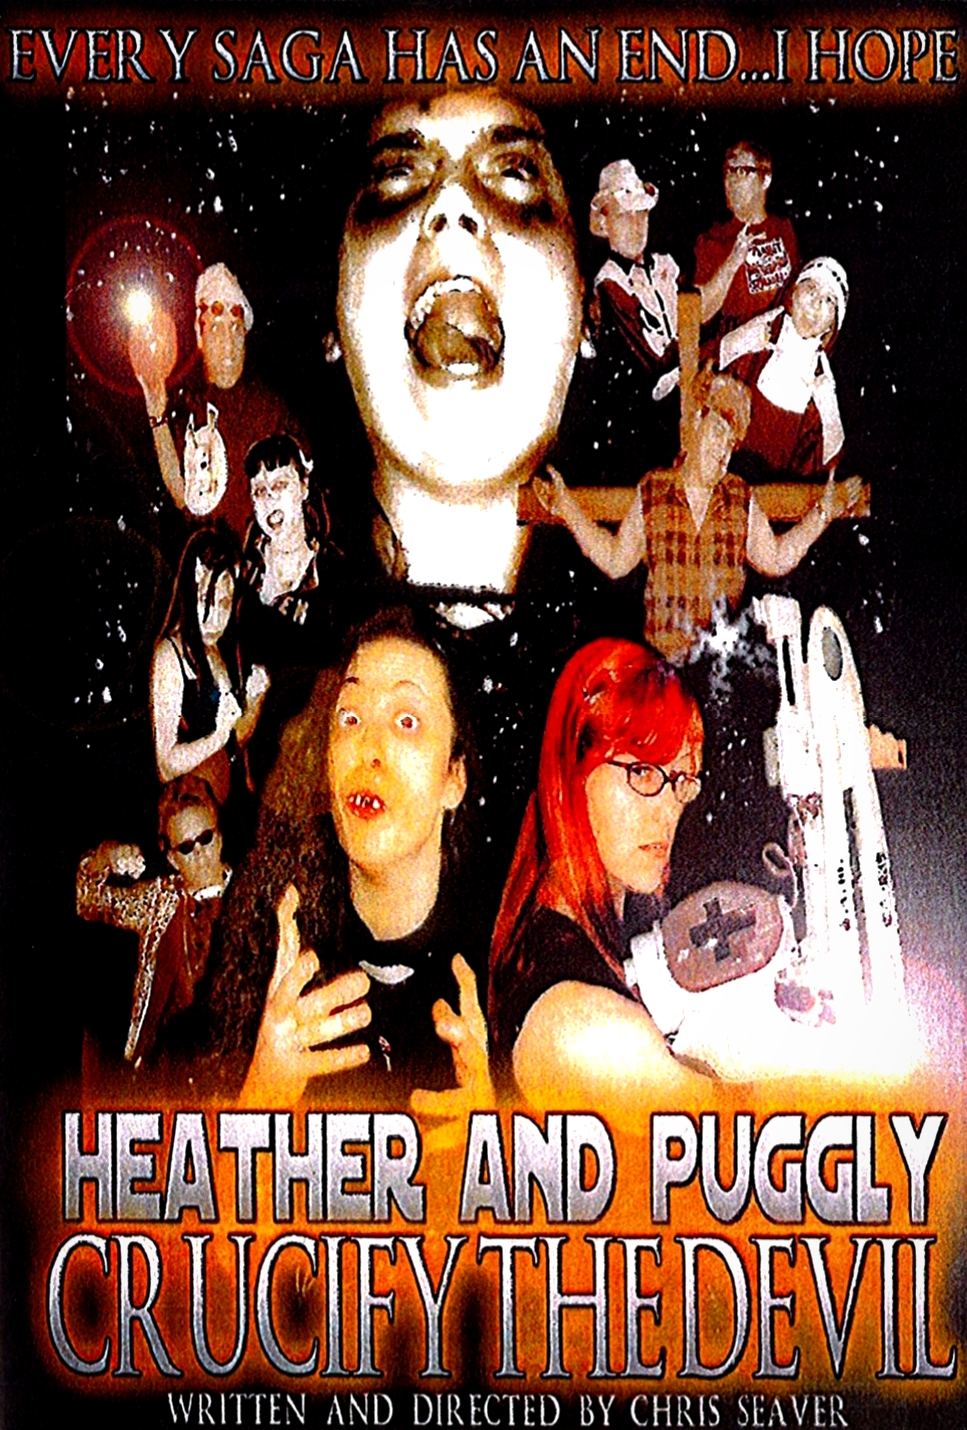 Heather and Puggly Crucify the Devil (2005) Screenshot 1